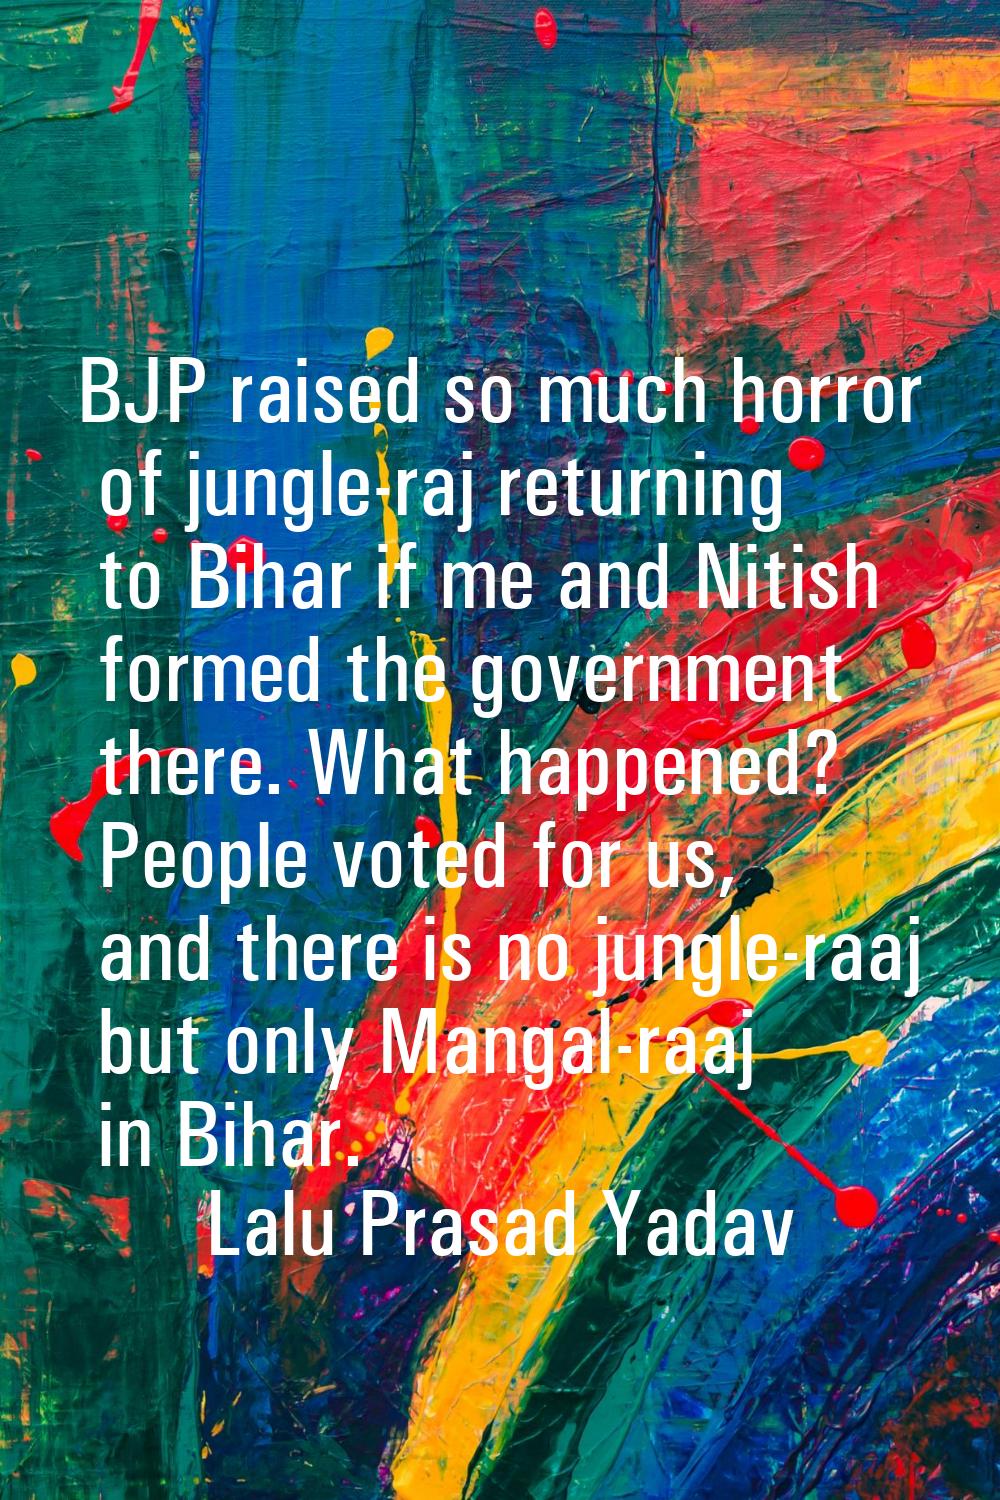 BJP raised so much horror of jungle-raj returning to Bihar if me and Nitish formed the government t